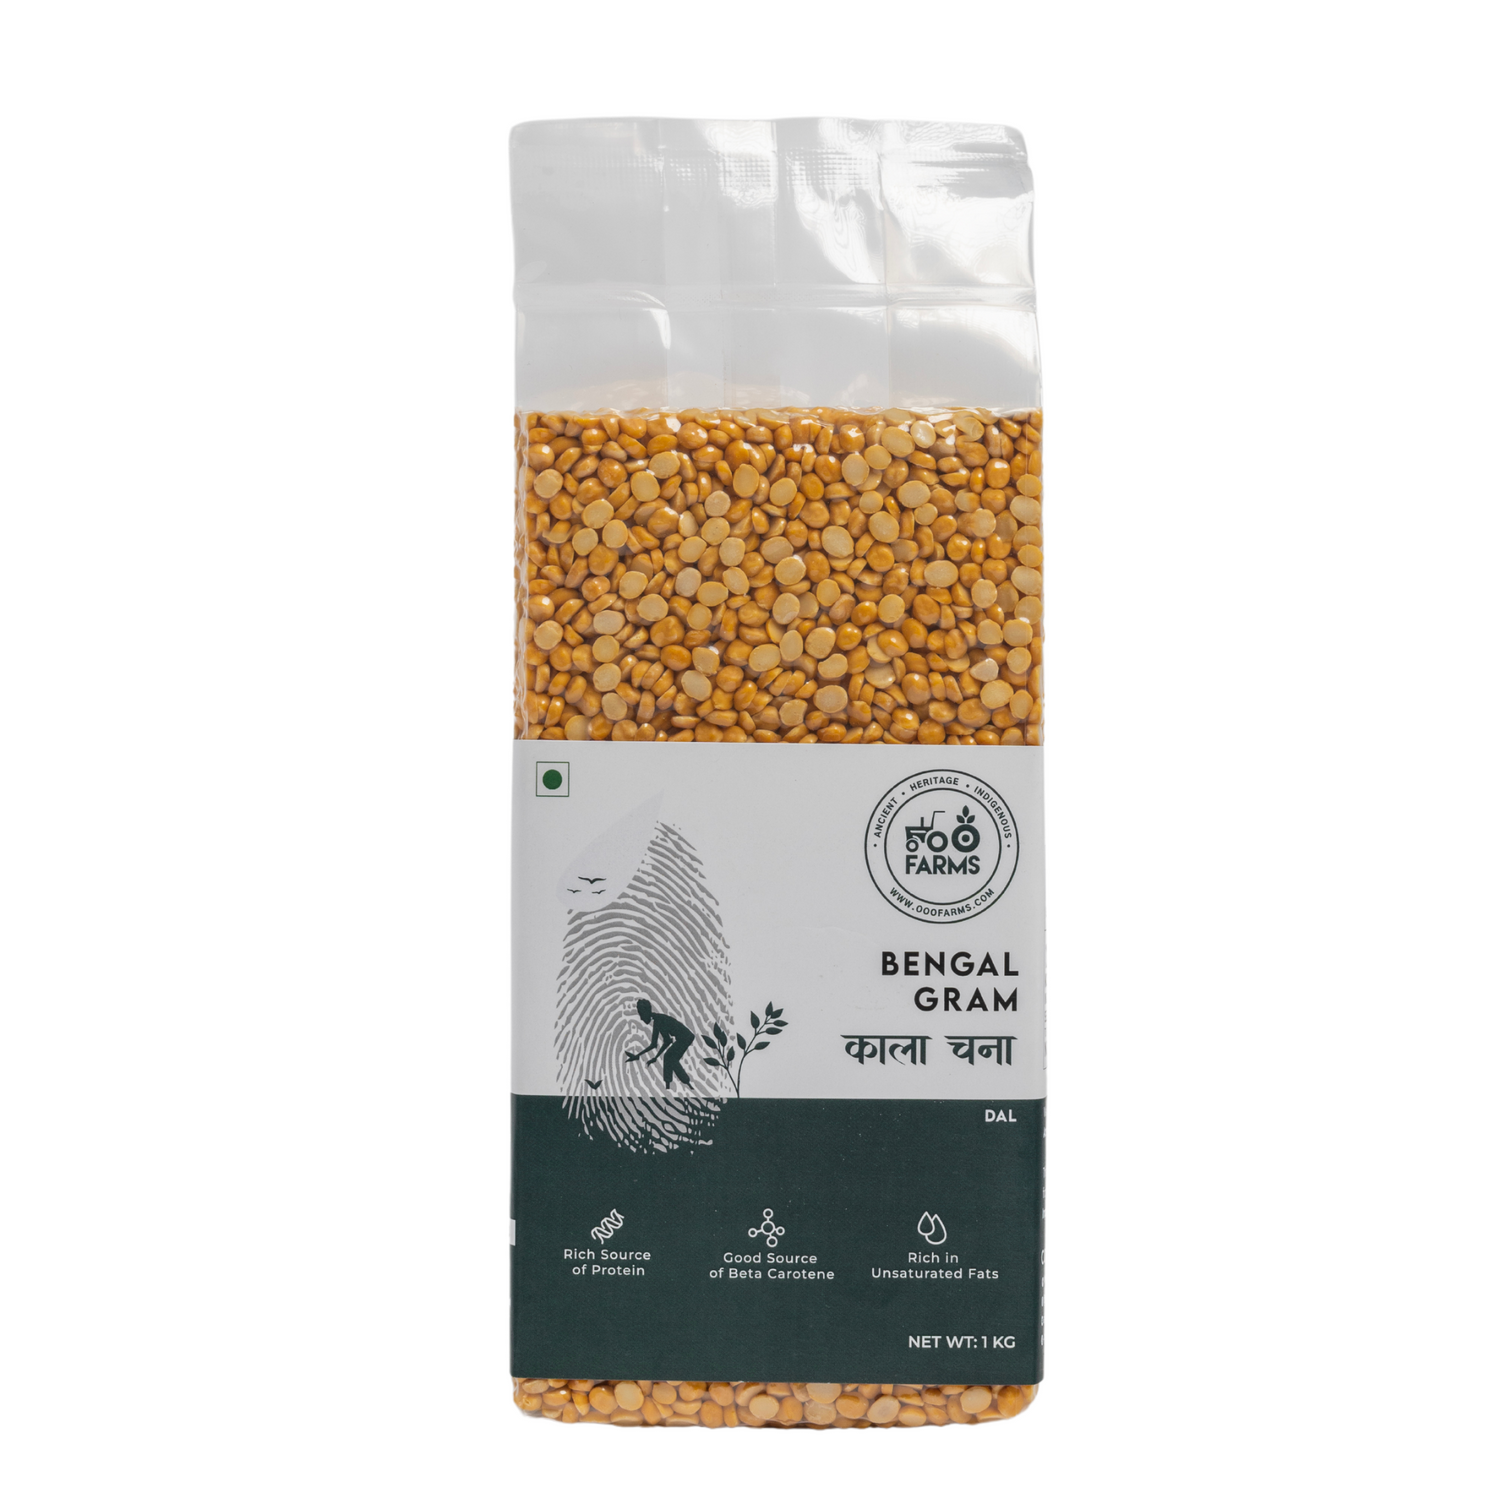 OOO Farms Brown Chana Dal Package Frontside